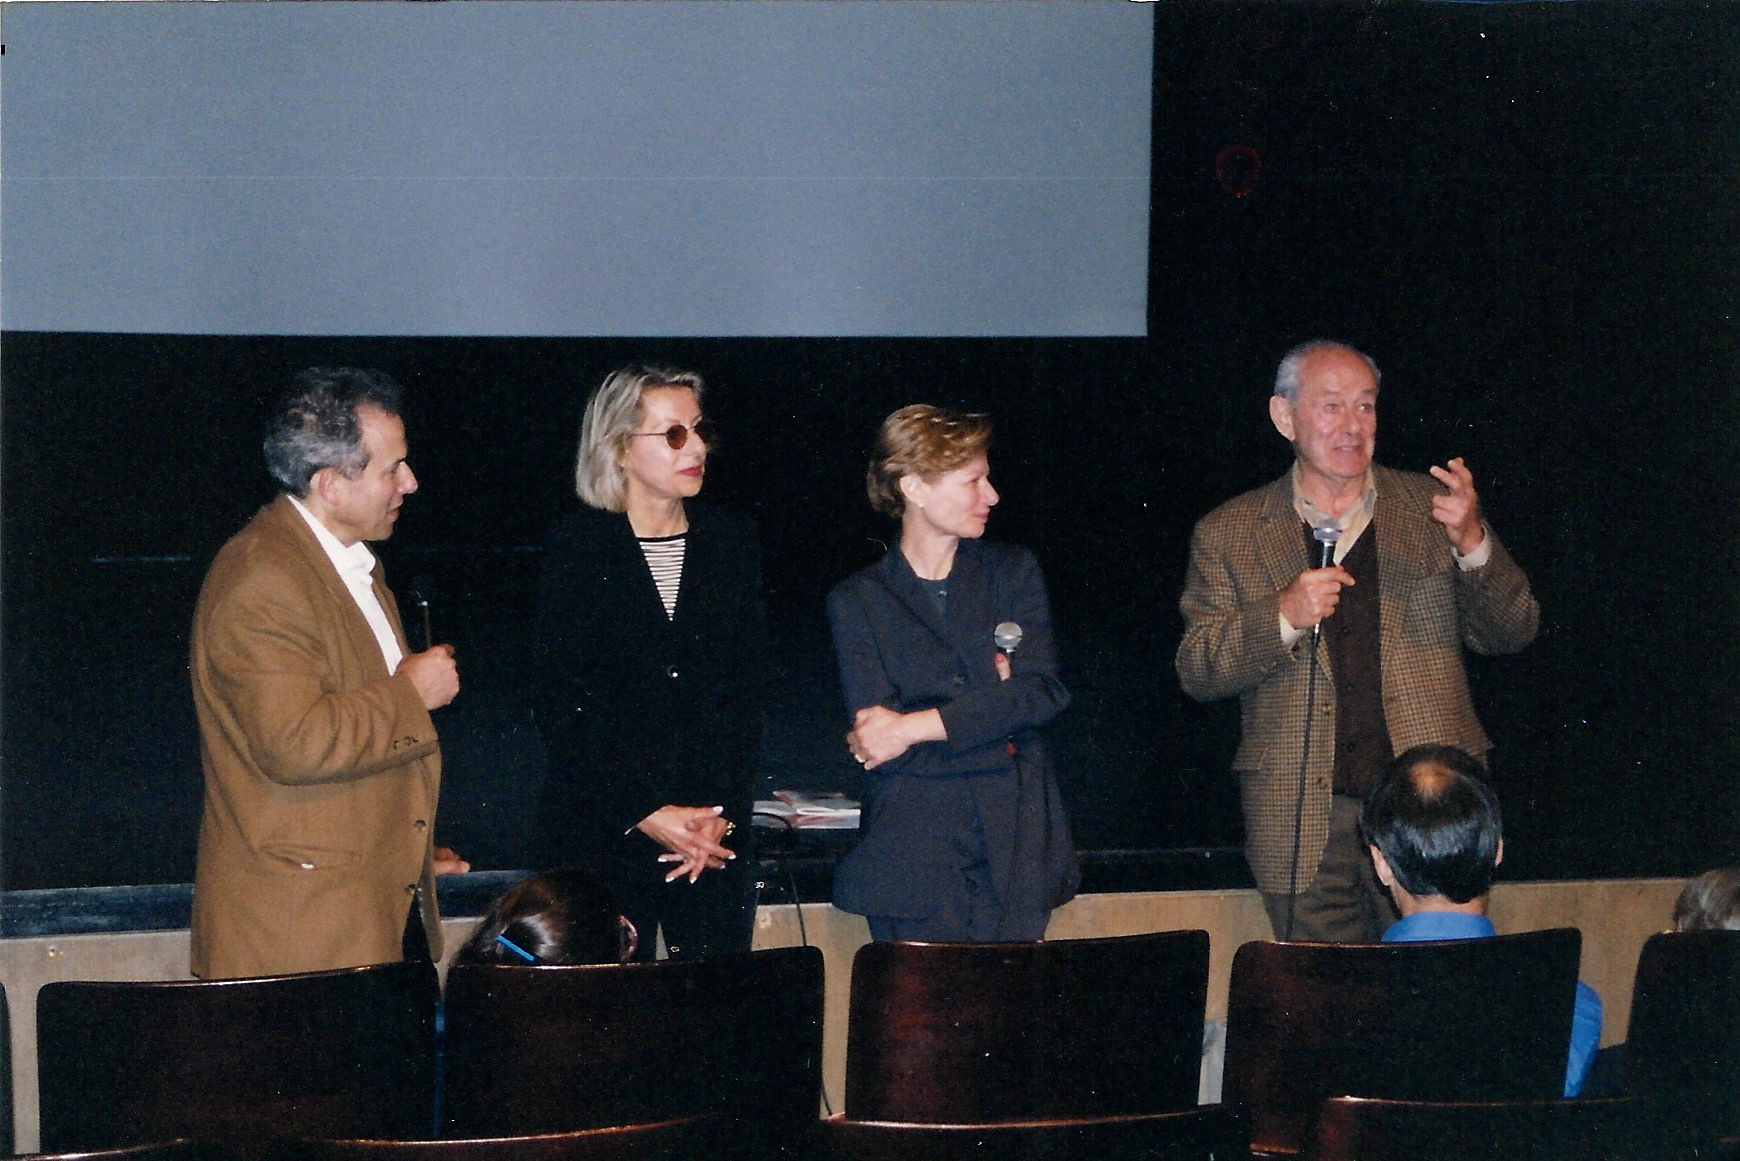  Producers Sonya Starr and Nina Rosenblum with Walter Rosenblum and Jerome Rudes, Director of the French-American Film Workshop at the film festival in New York 